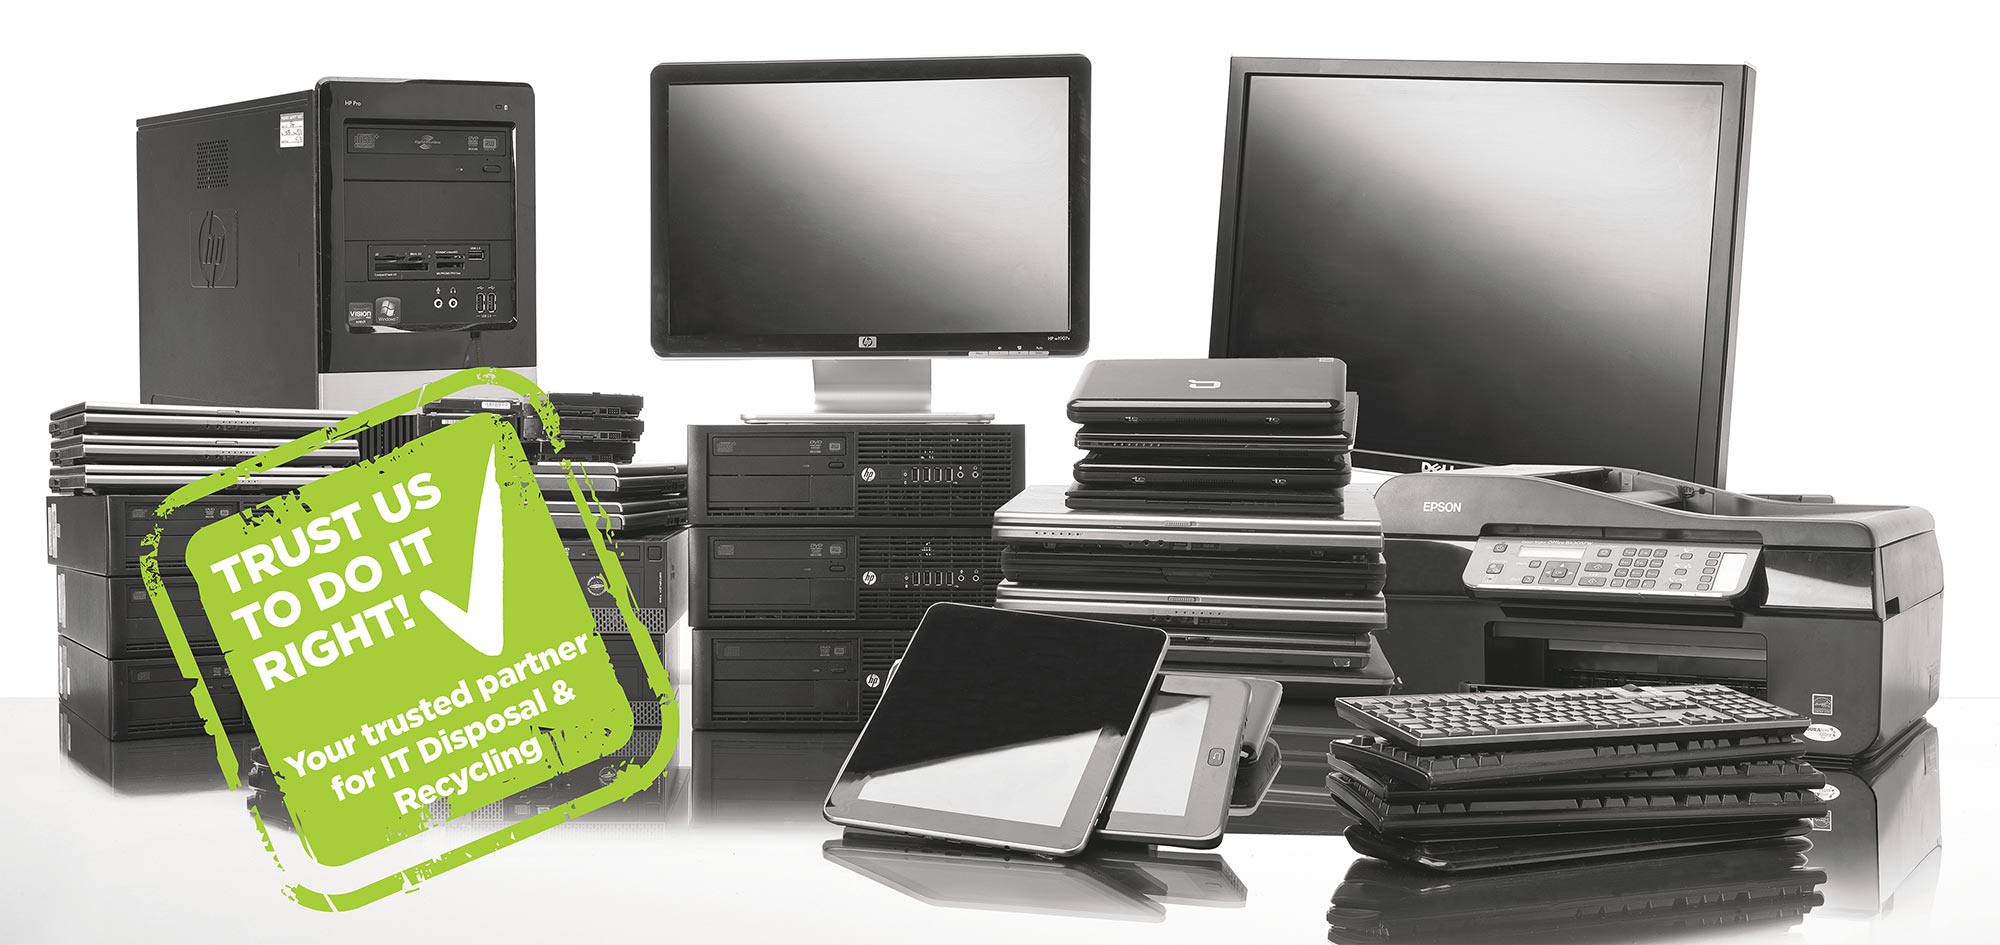 What is e-waste, and what should I know about it?